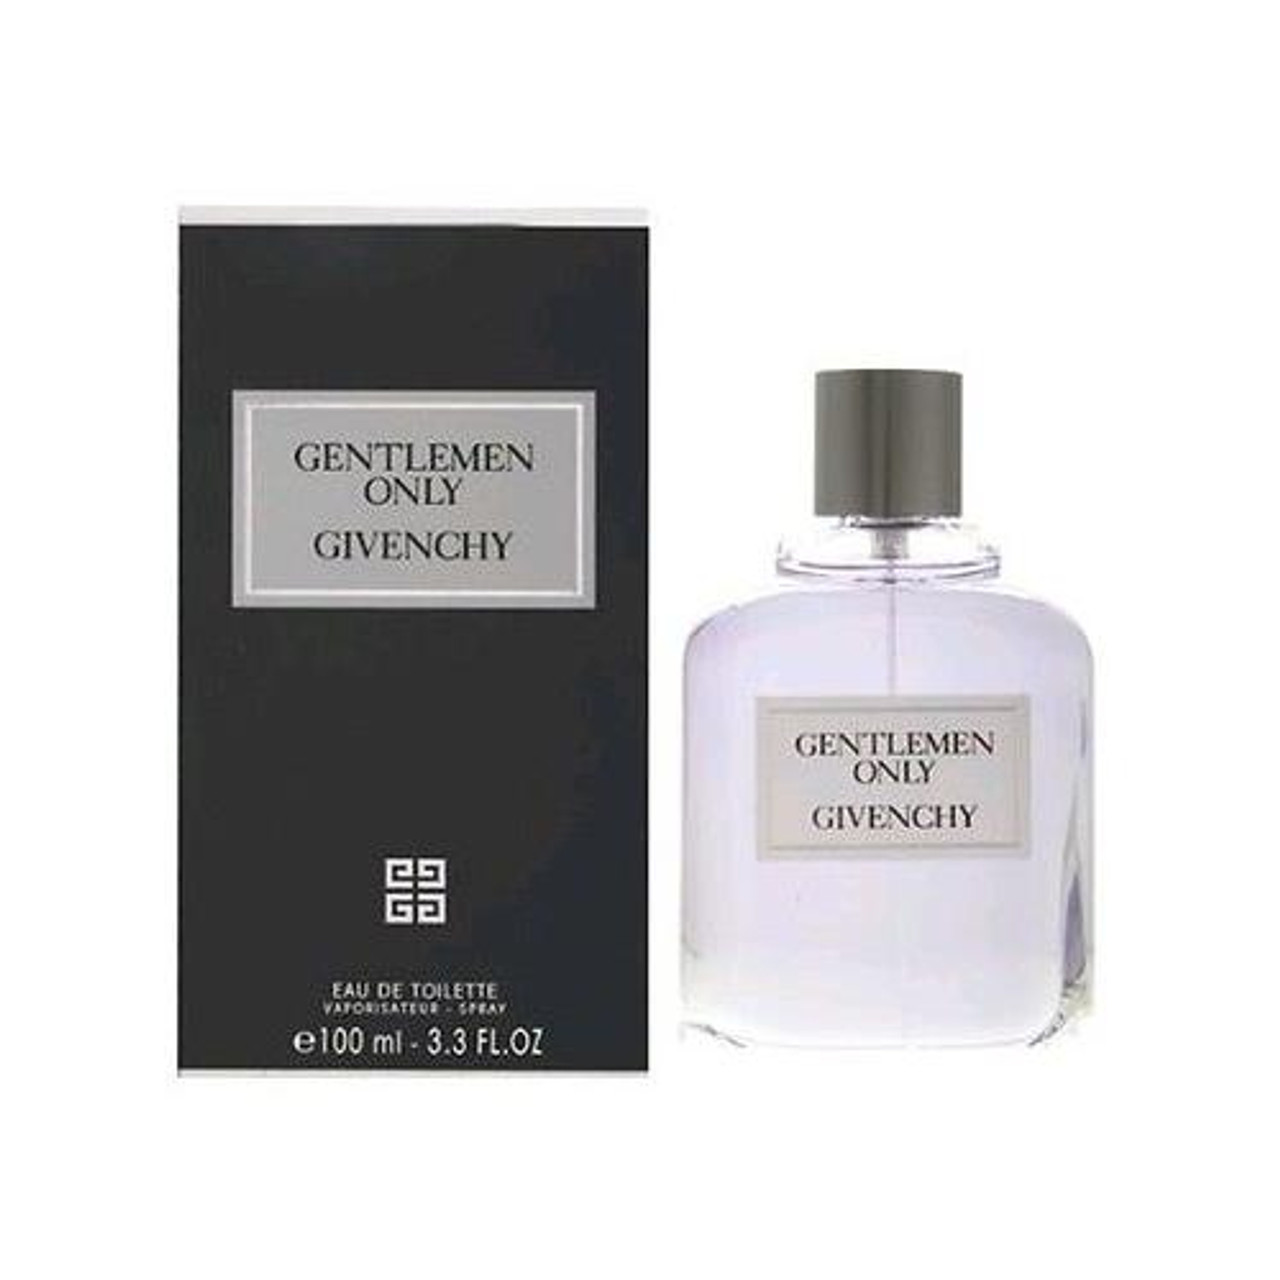 Added to the collection! Gentleman Givenchy Edt Intense & Ralph